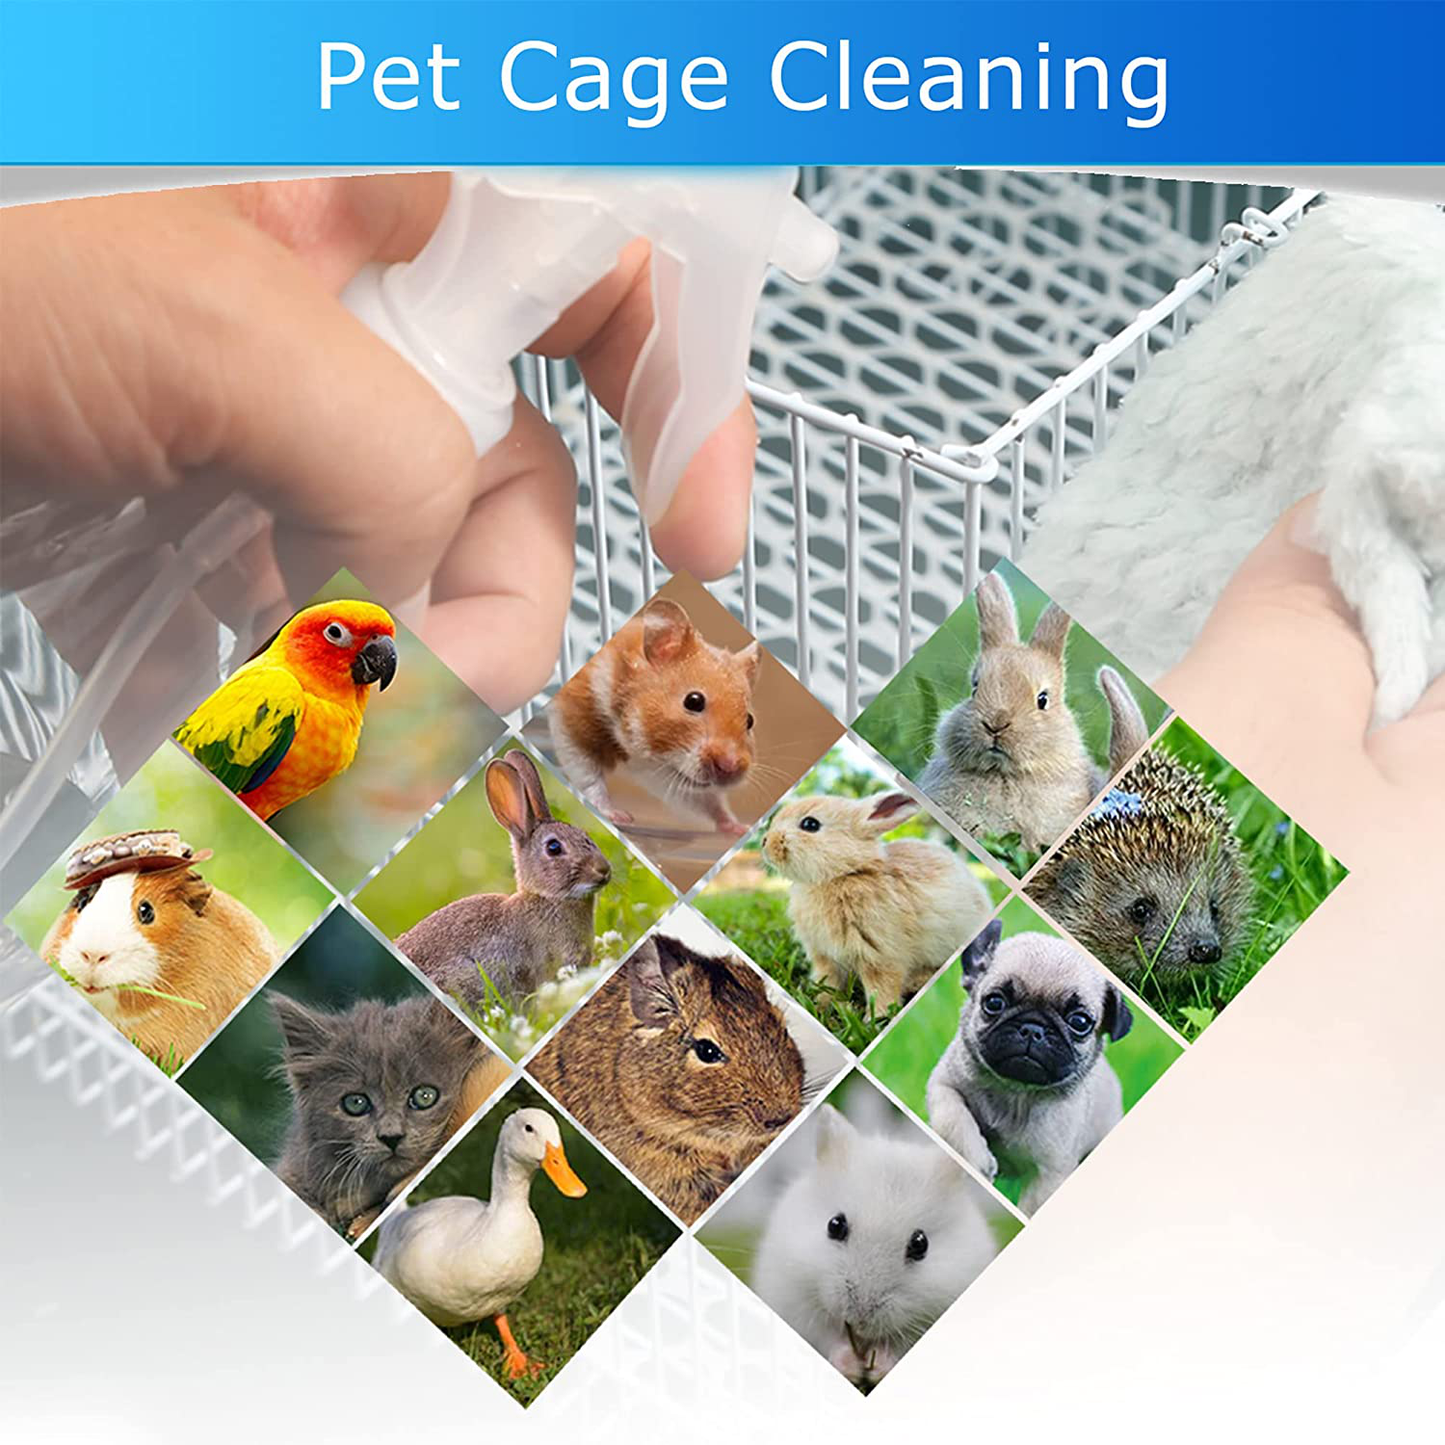 Ephoria Pet Cage Cleaner Tool,13-Piece Cleaning Tools for Cat Dog Rabbit Hamster Guinea Pig Bird Parrot Lizard for Pets Cages Playpen Bedding Brush Rag Manure Shovel with Storage Bag